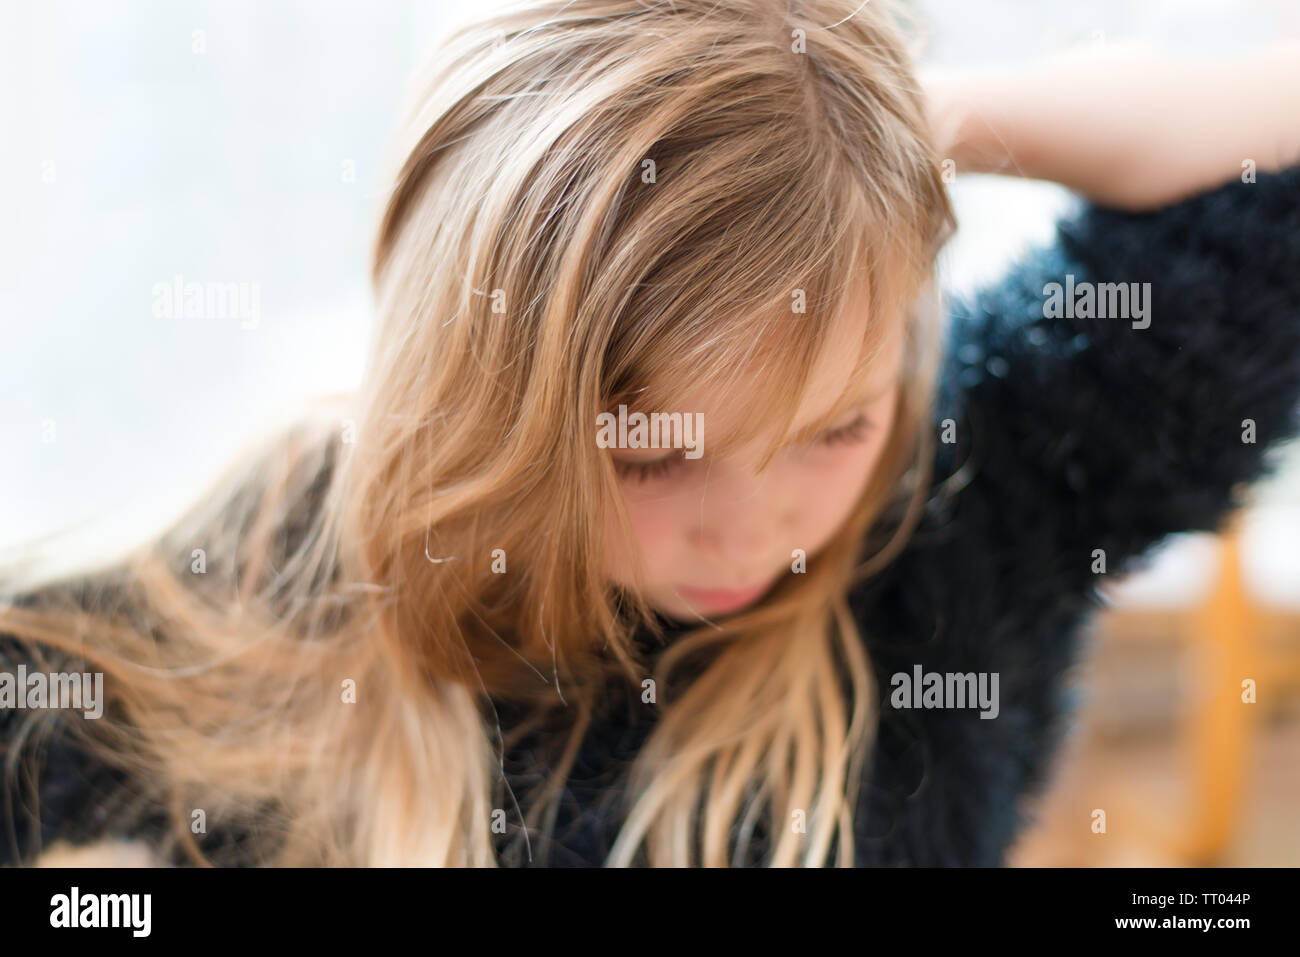 Young pretty girl brushing her long hair in soft dreamy focus Stock Photo